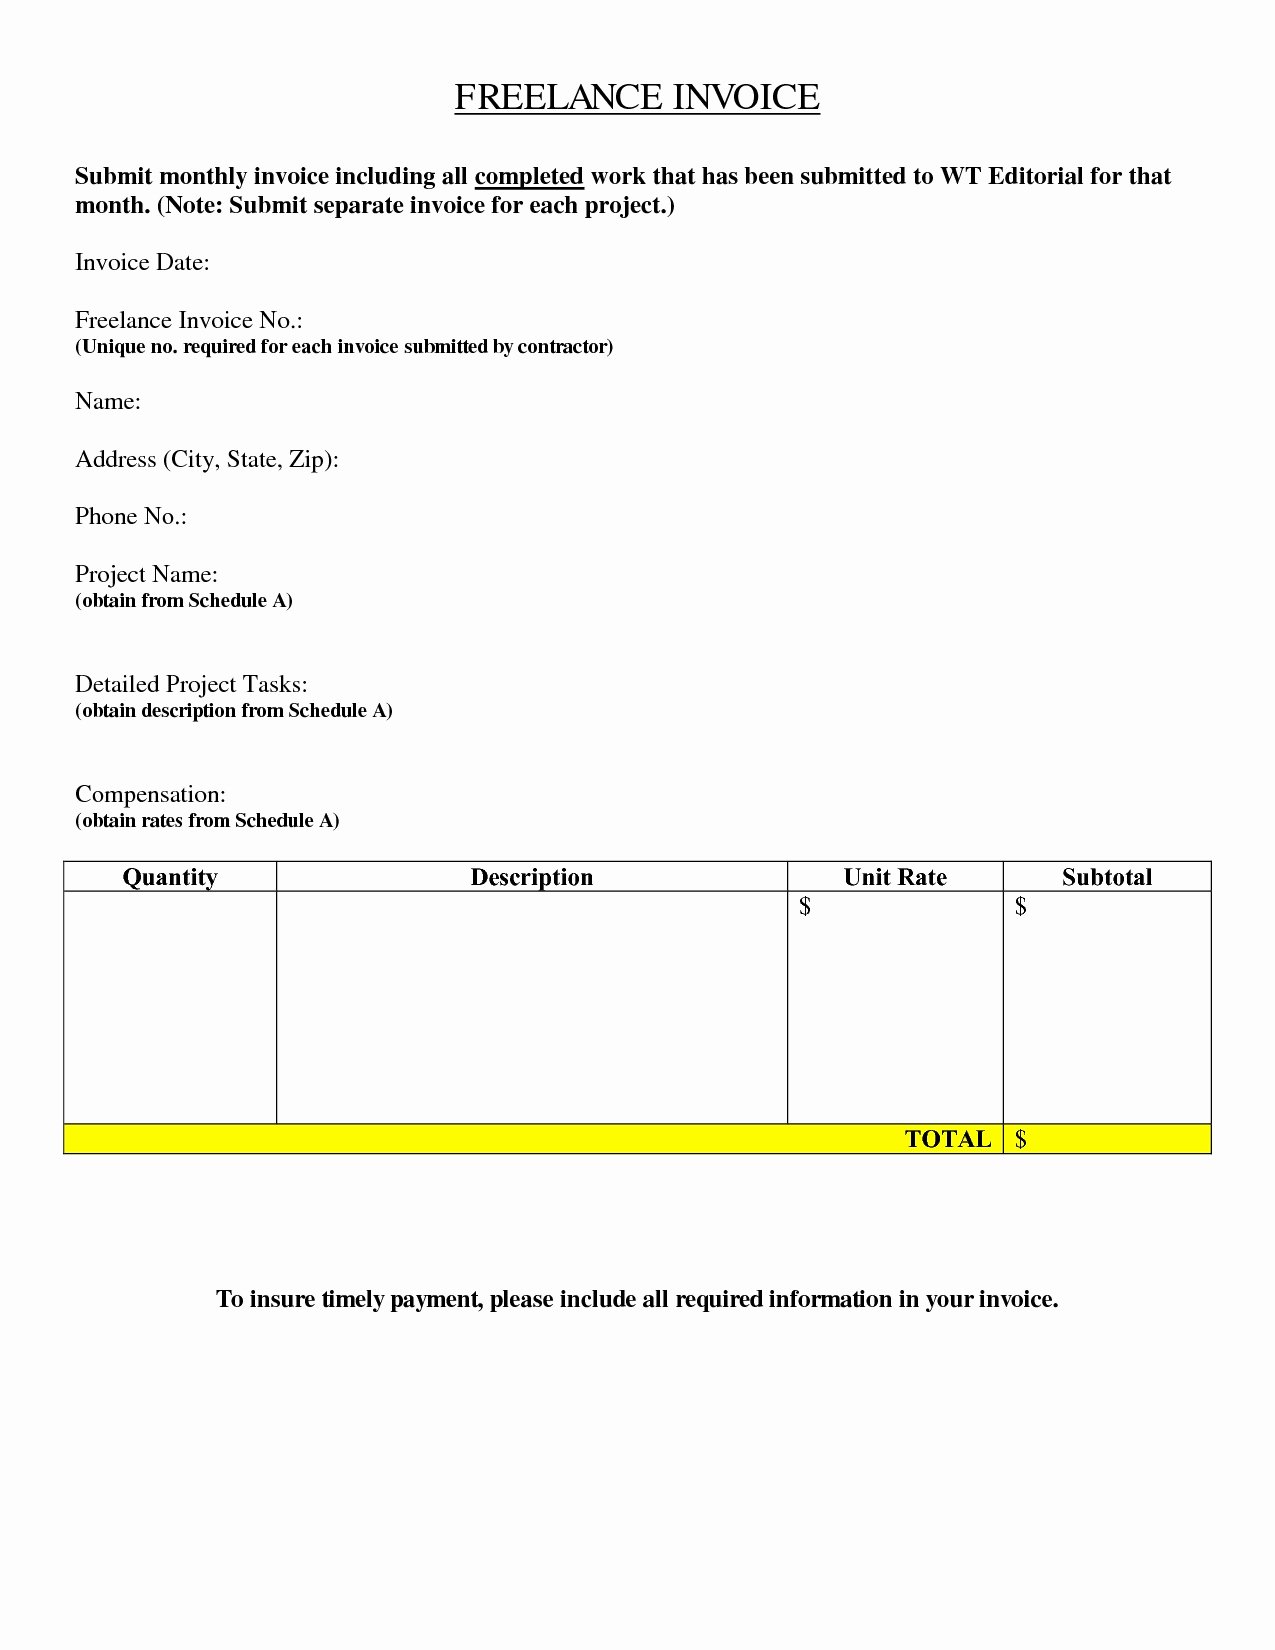 Invoice Template for Freelance Work Invoice Template Ideas